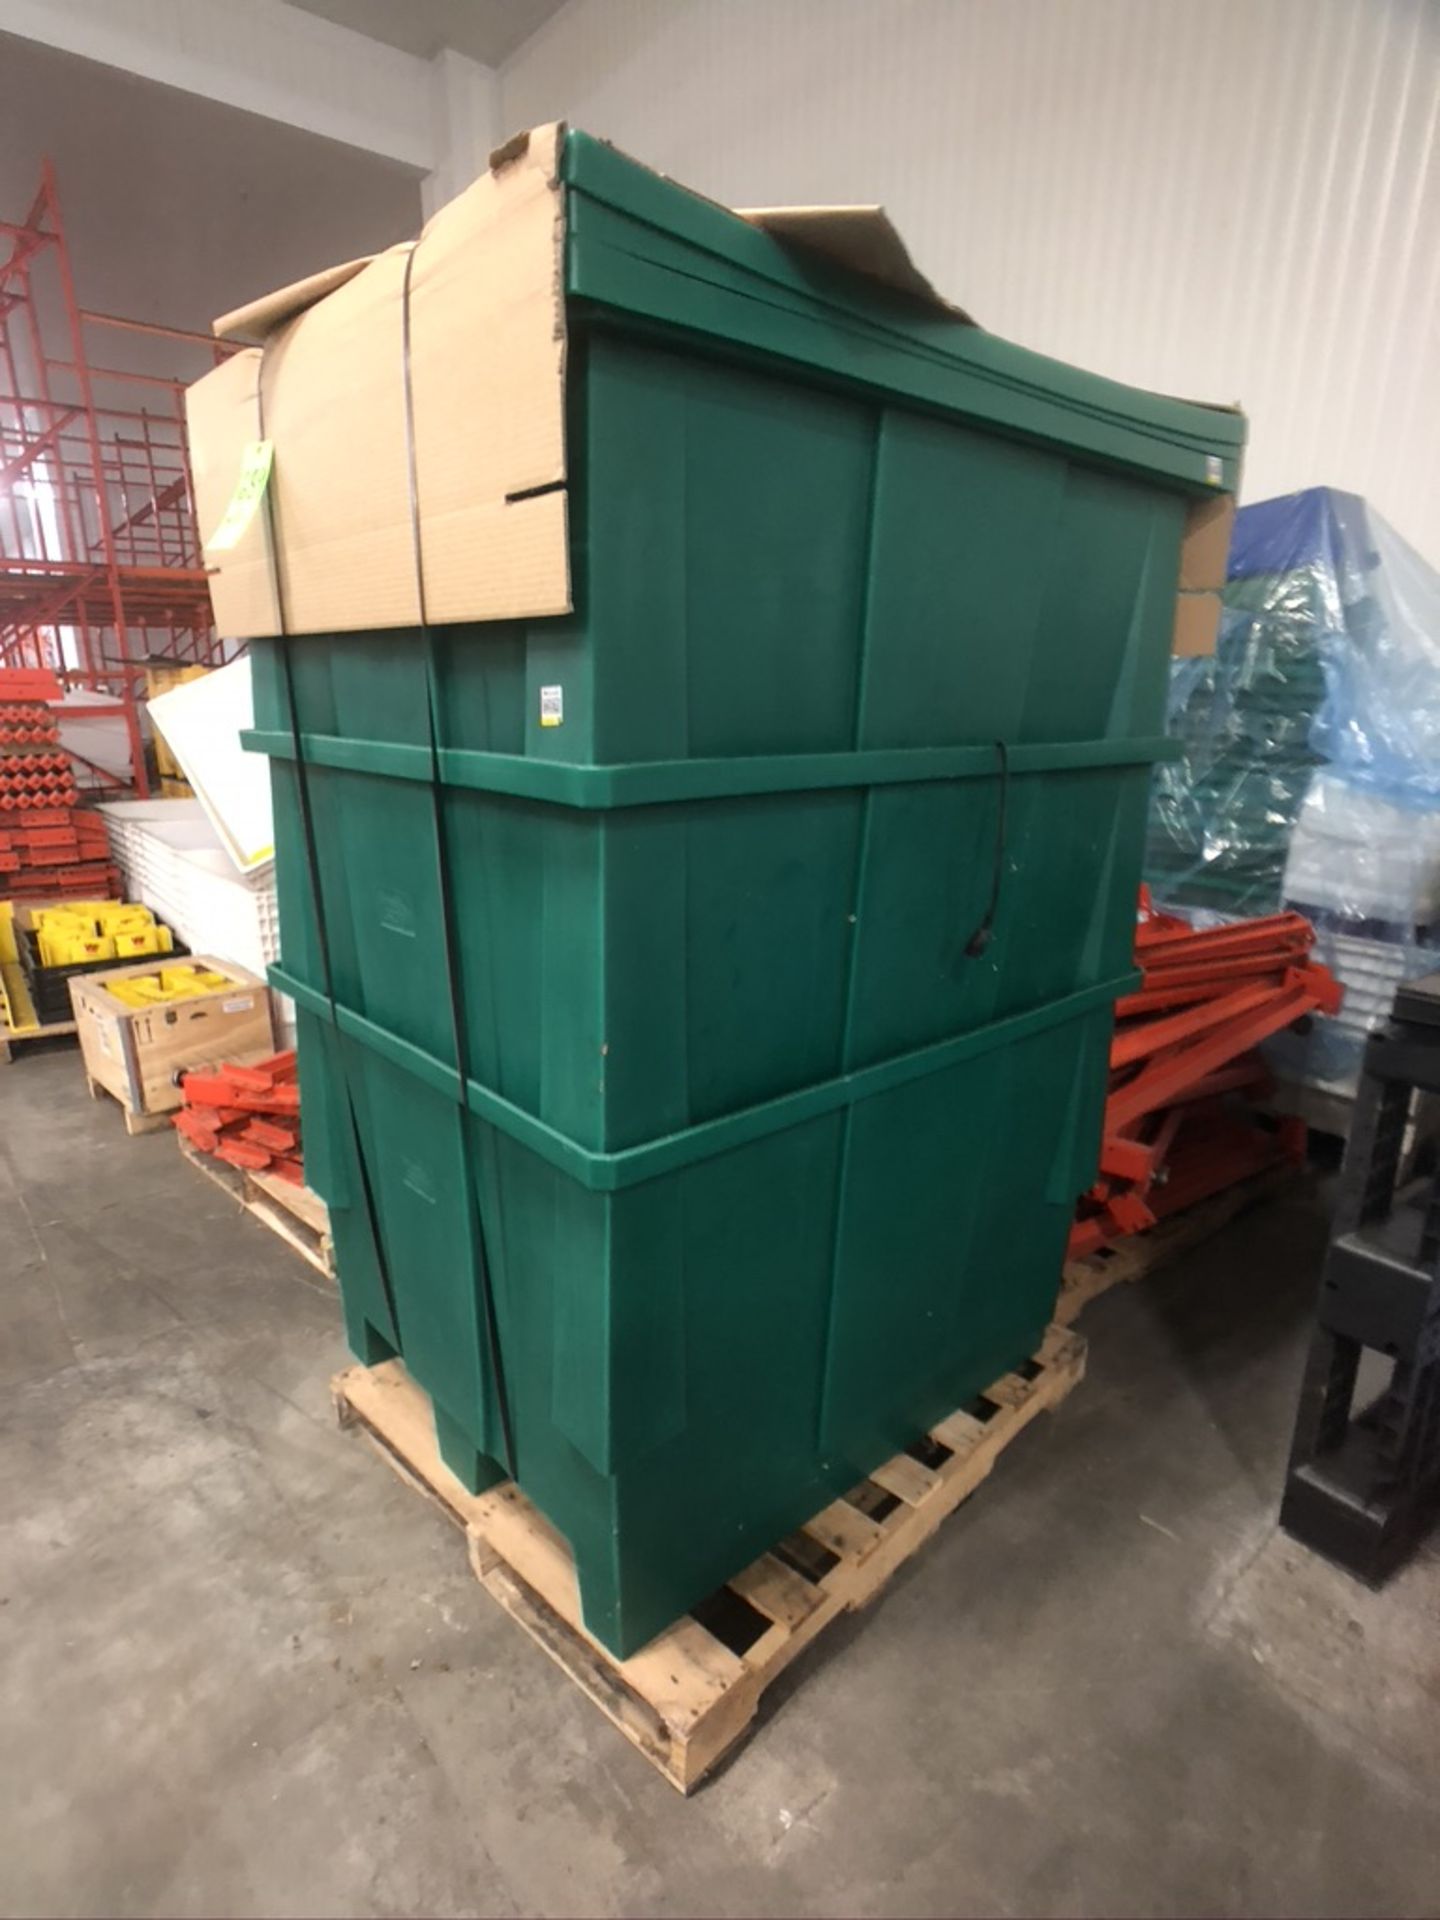 (3) LARGE GREEN FOOD STORAGE BINS APPX DIN. LWH'' 50 X 41 X 33, INCLUDES (3) LIDS - Image 2 of 3